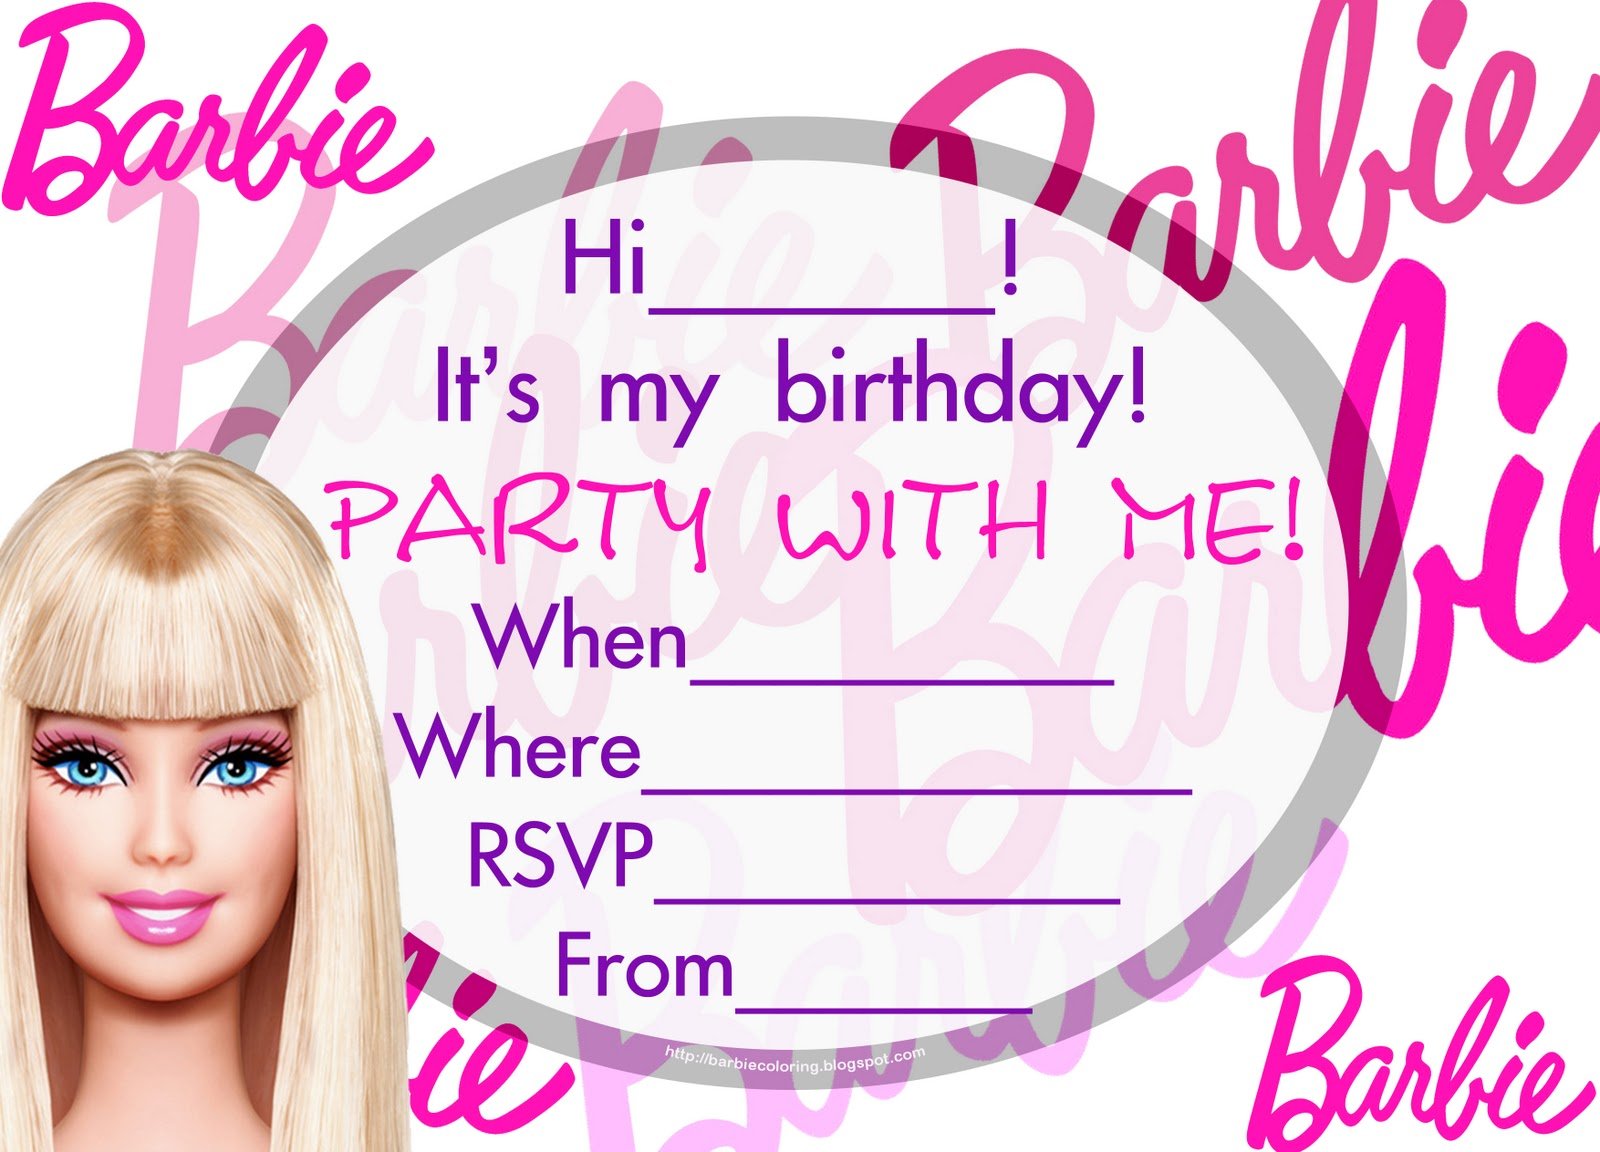 free-print-barbie-invitations-birthday-invitations-printable-and-post-barbie-ideas-for-the